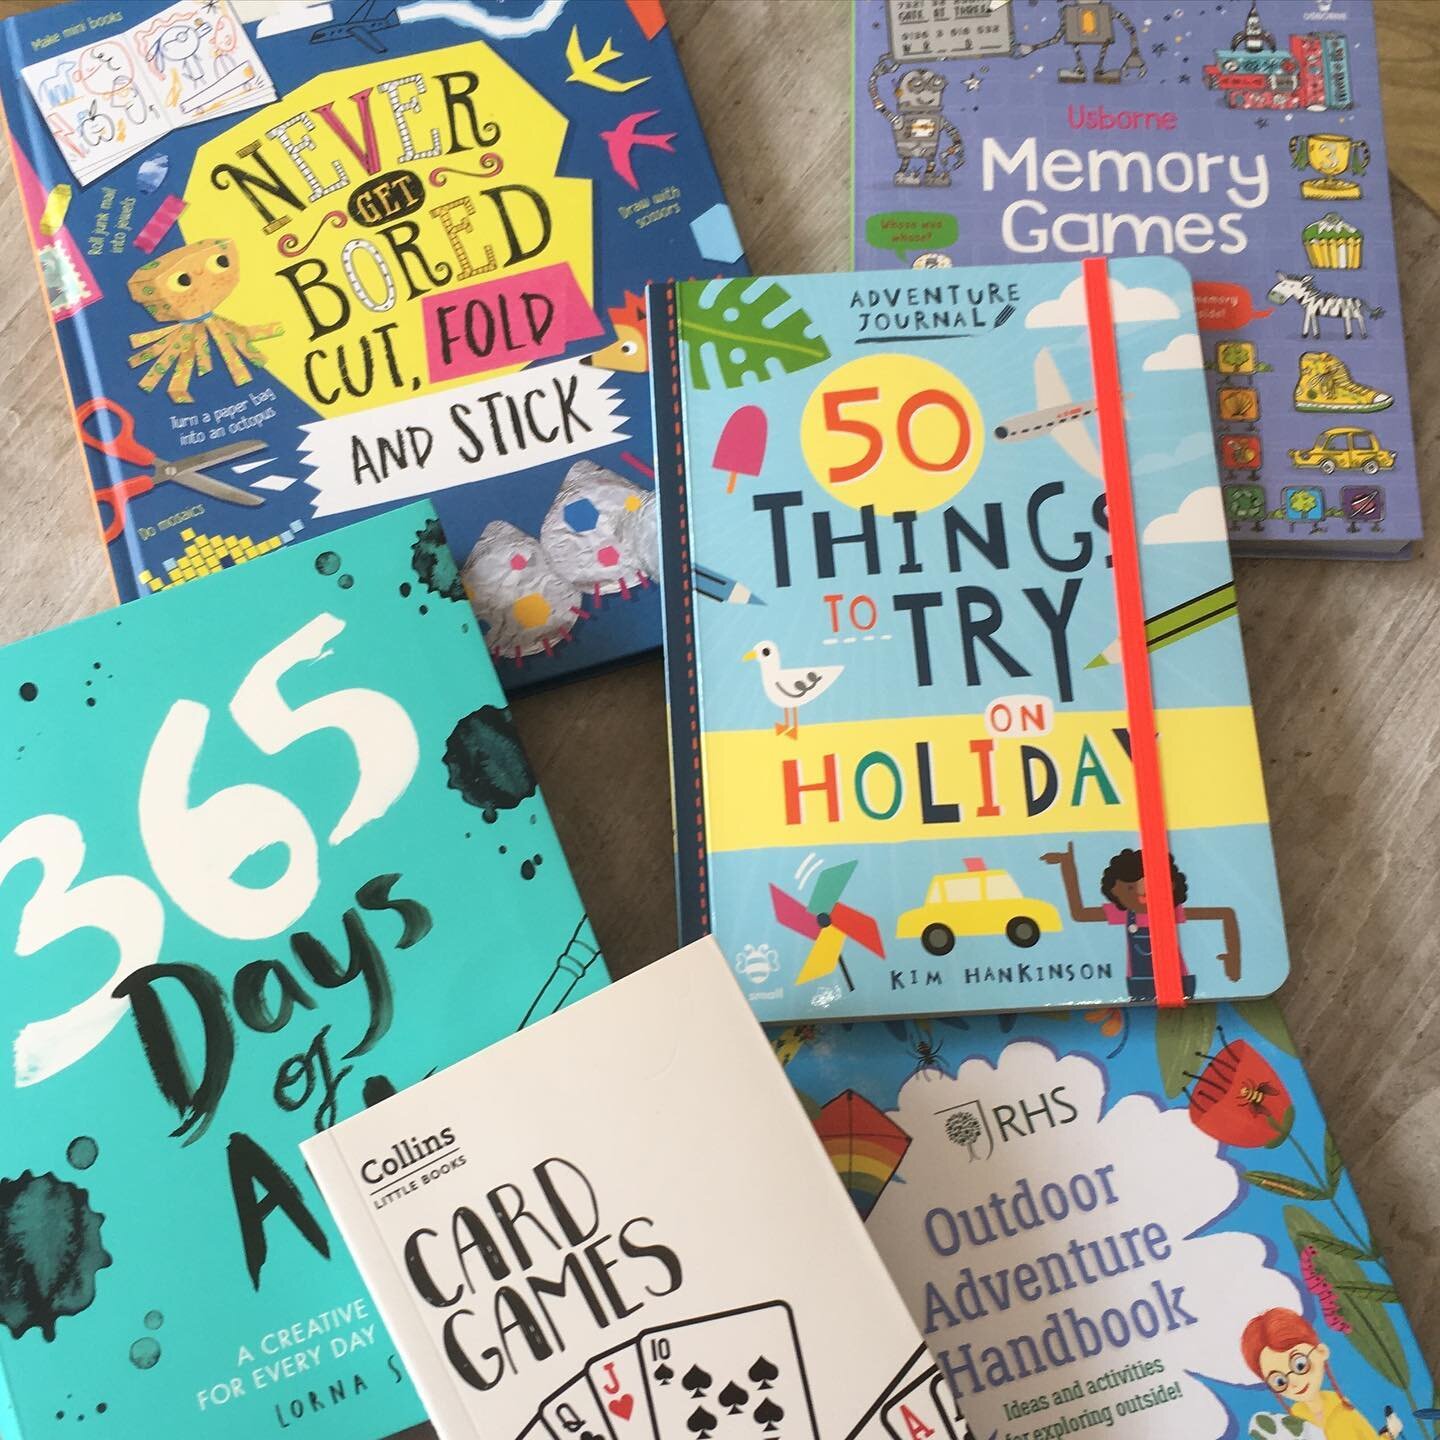 &lsquo;What are we going to do today?&rsquo; Pre-empt the question! Lots of ideas in these books and lots of other activity books too!
Get ready, get set, get busy! @usborne_books @lornascobie  @scholastic_uk